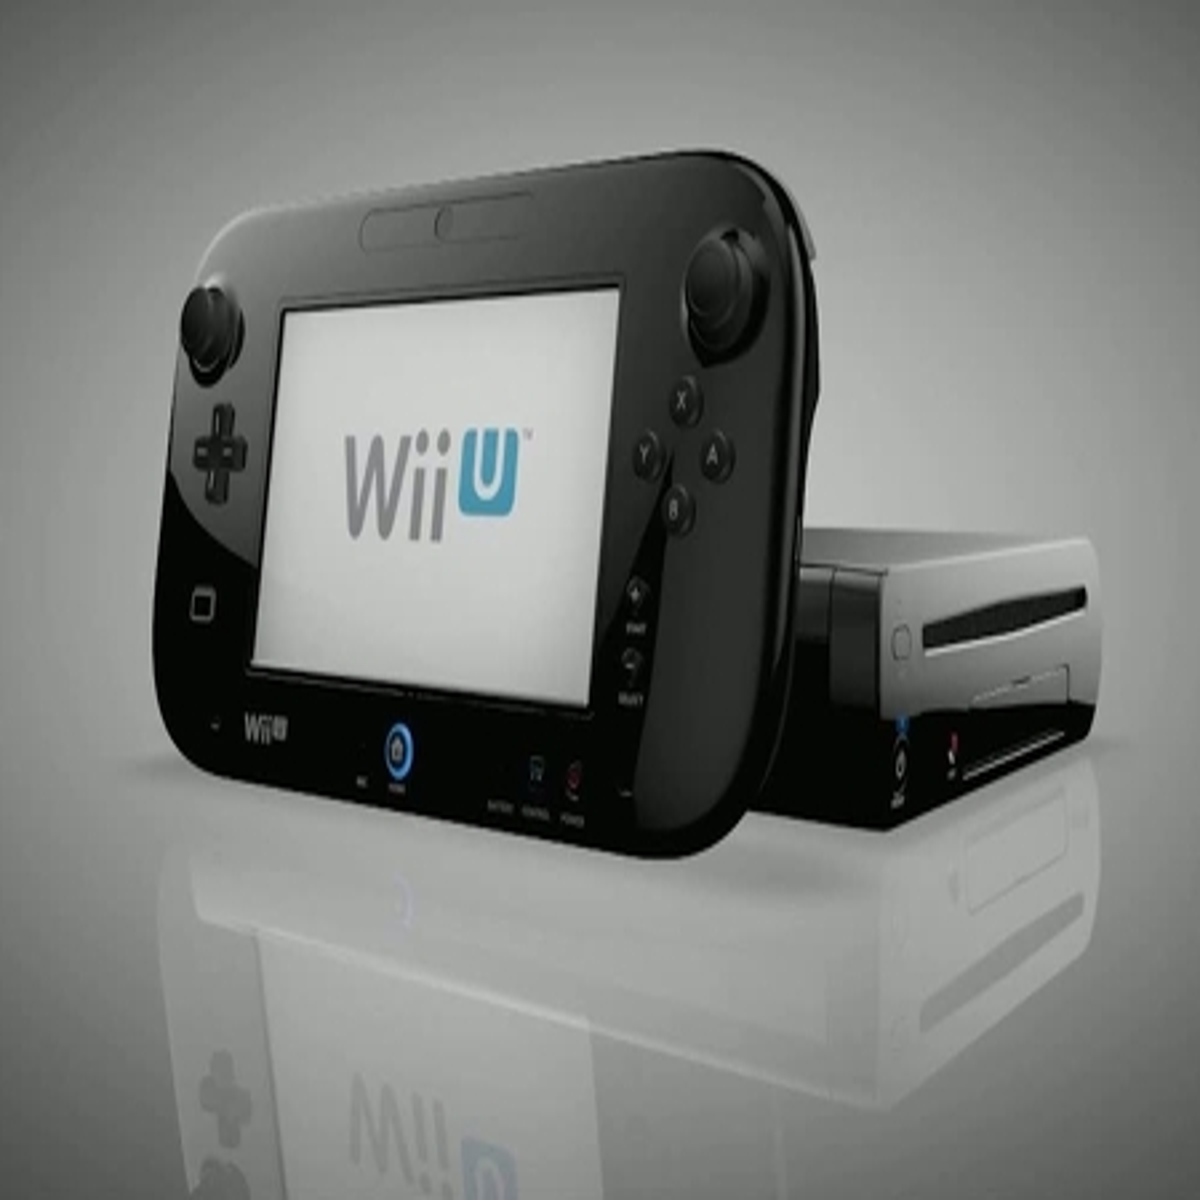 Wii U GamePad high-capacity battery now available, promises 8 hours of use  - GameSpot